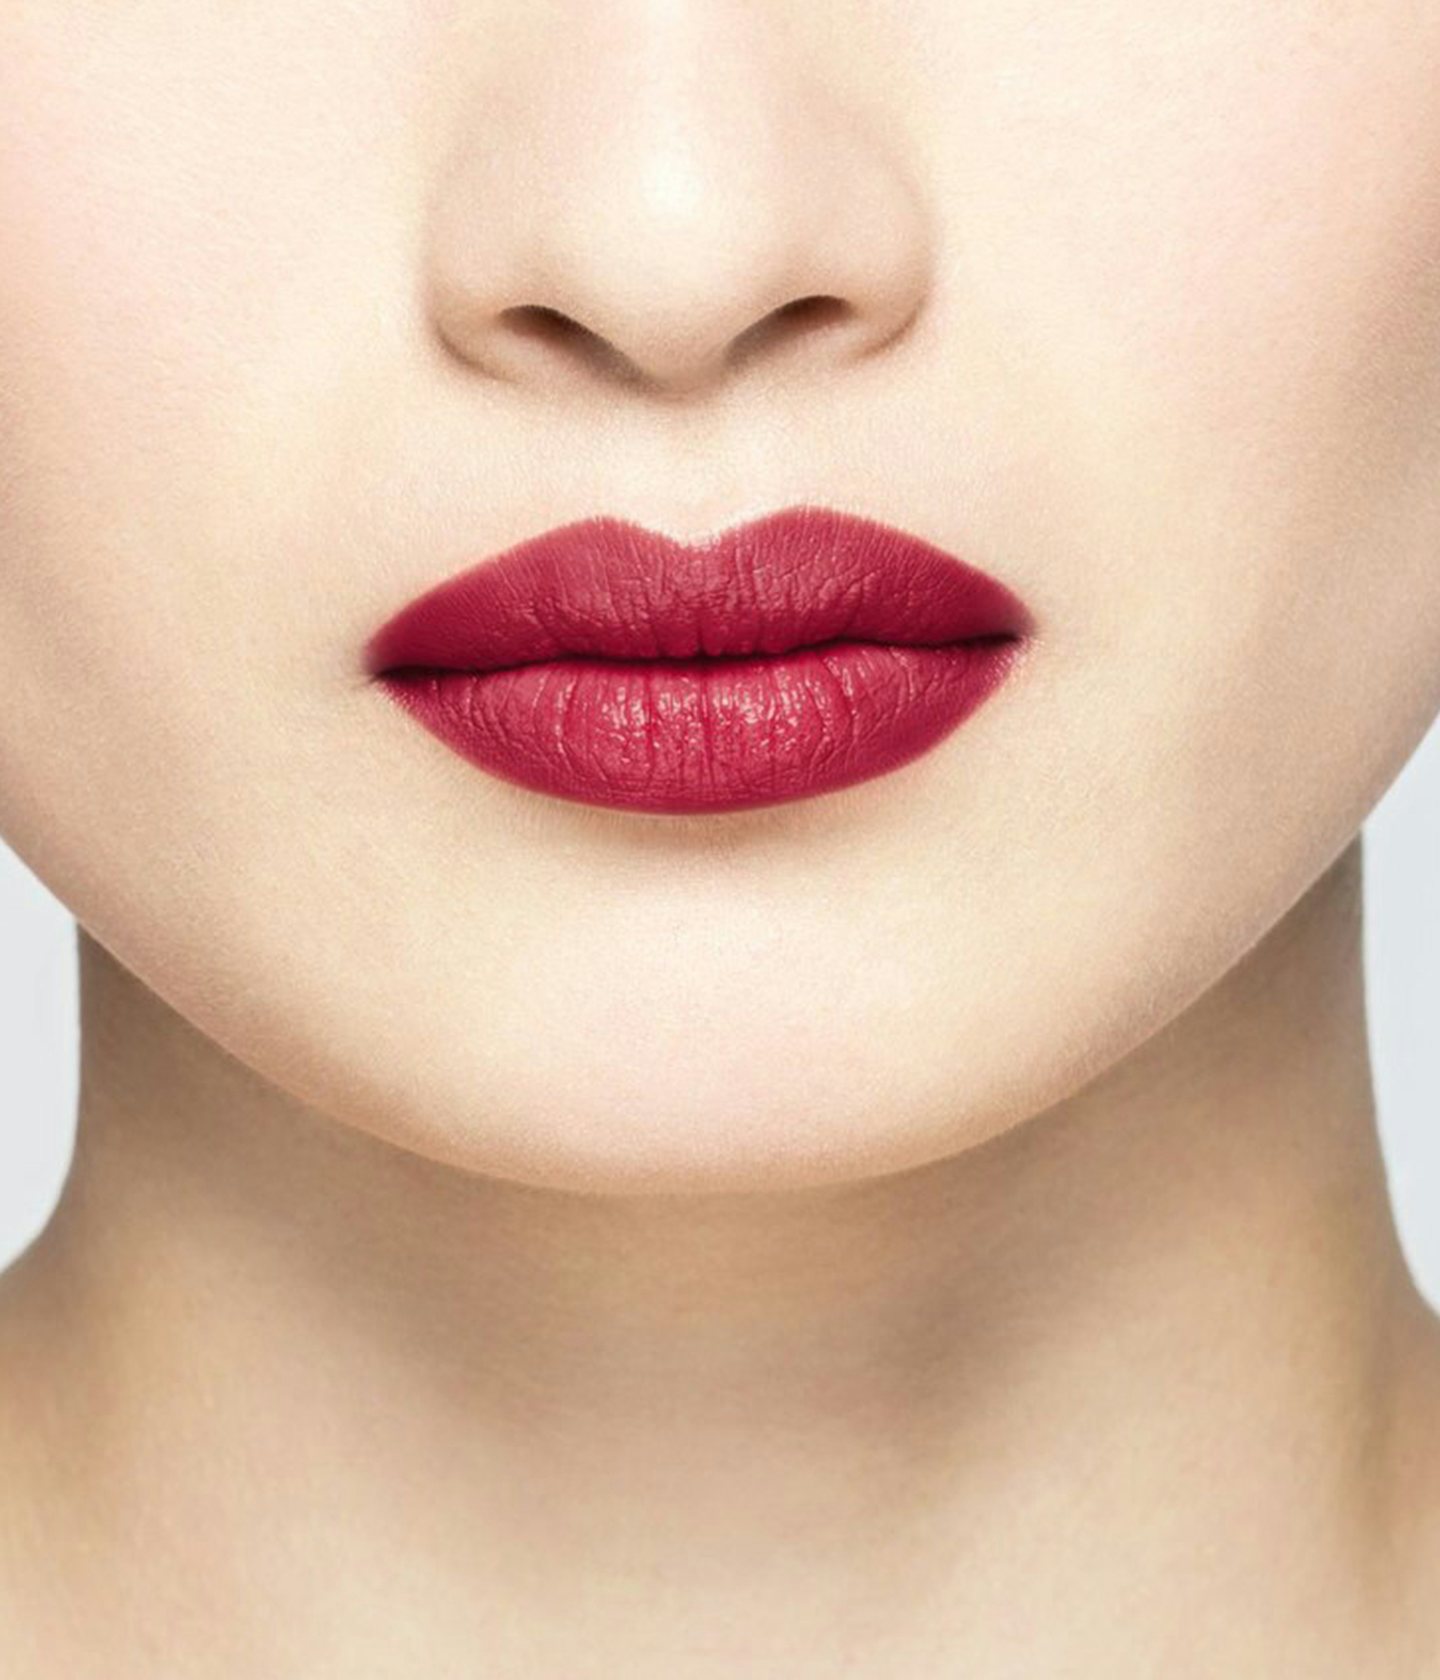 La bouche rouge Le Rouge Anja lipstick shade on the lips of an Asian model